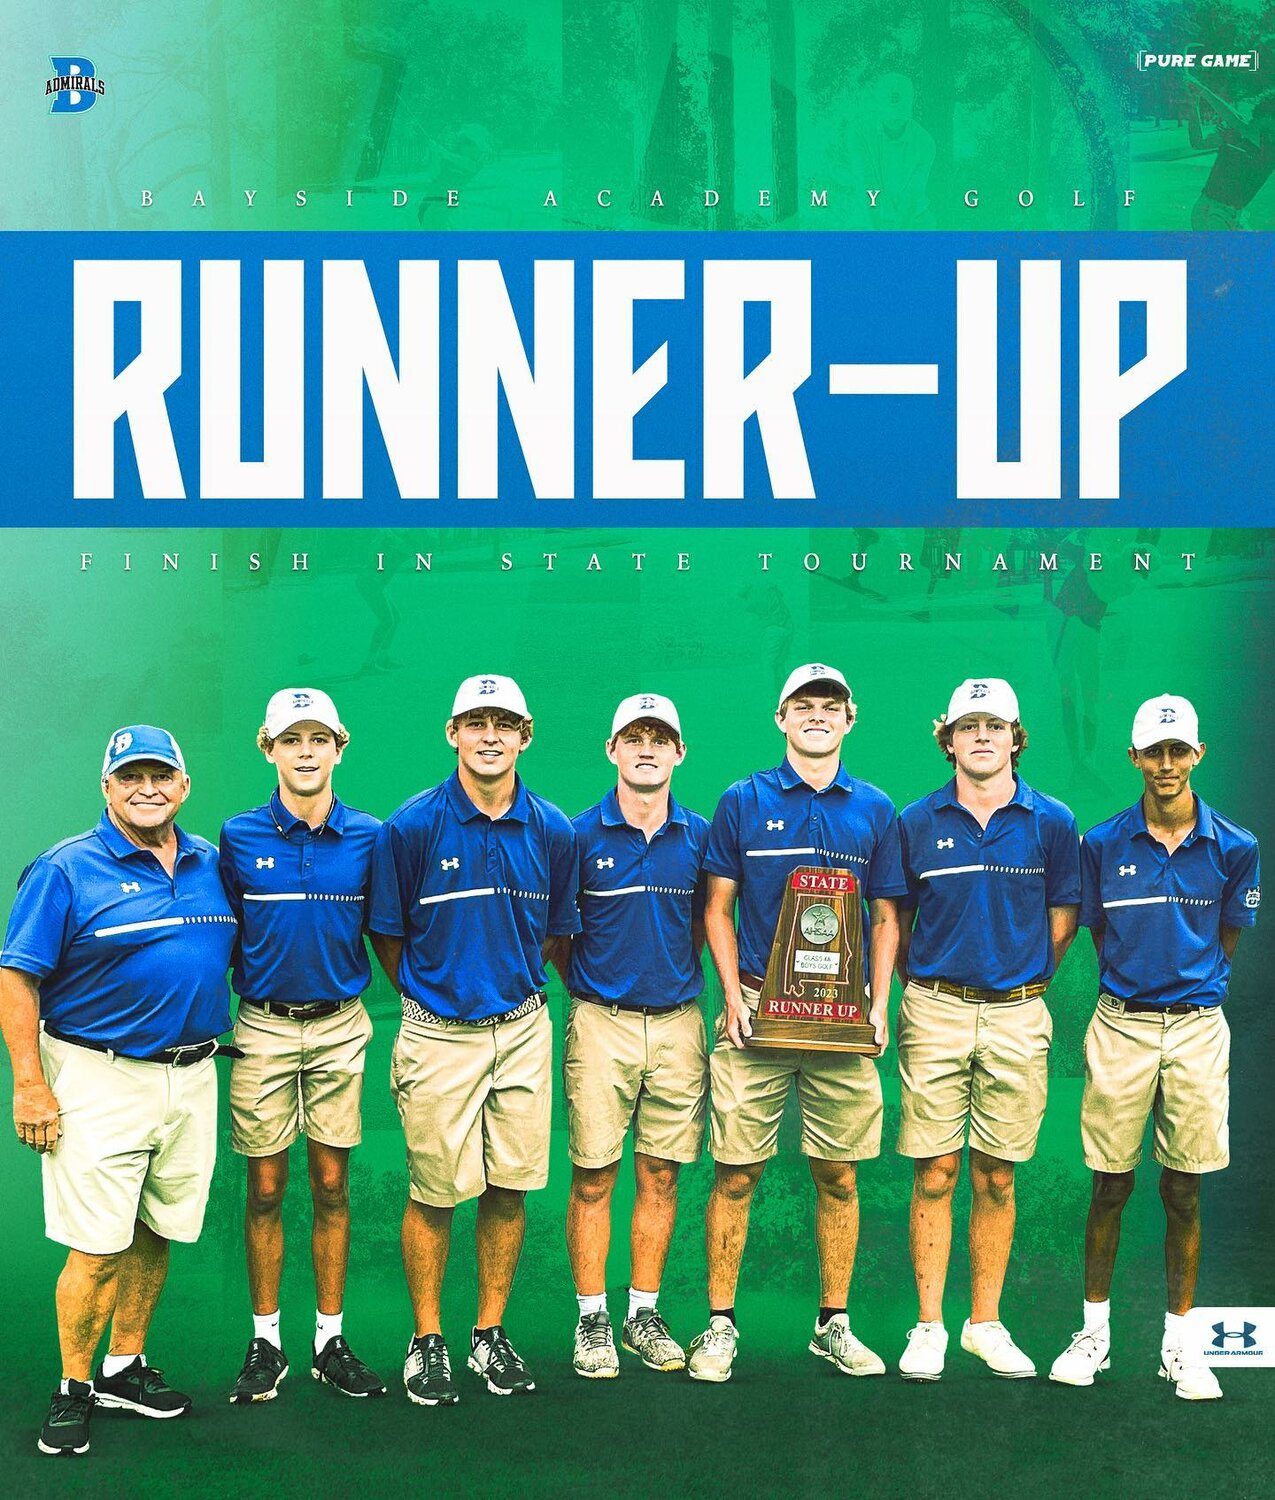 The Bayside Academy Admiral boys’ golf team took second place in the team competition at the Alabama High School Athletic Association’s Class 4A state championship tournament in Opelika Tuesday, May 16. Luke Ferguson, who had won a soccer state championship just three days prior, was his team’s lowest shooter with a score of 149.